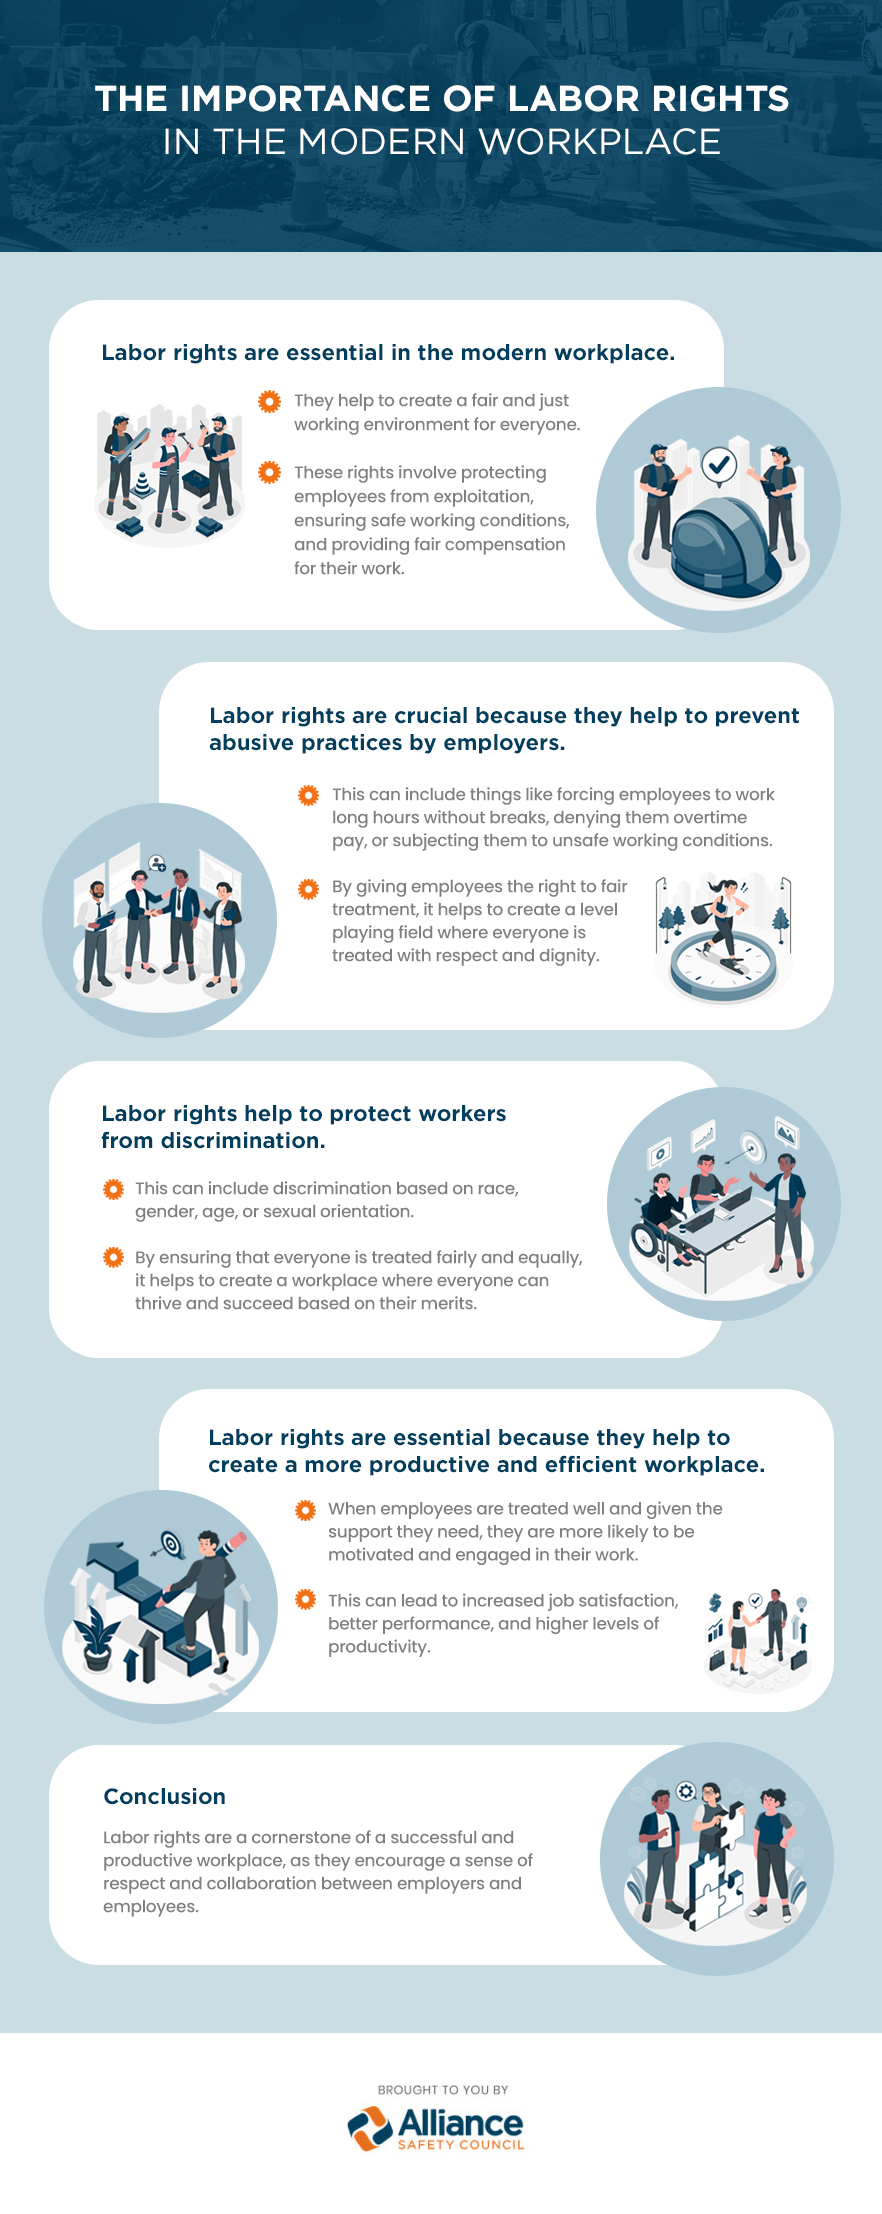 The importance of Labor Rights in the modern workplace